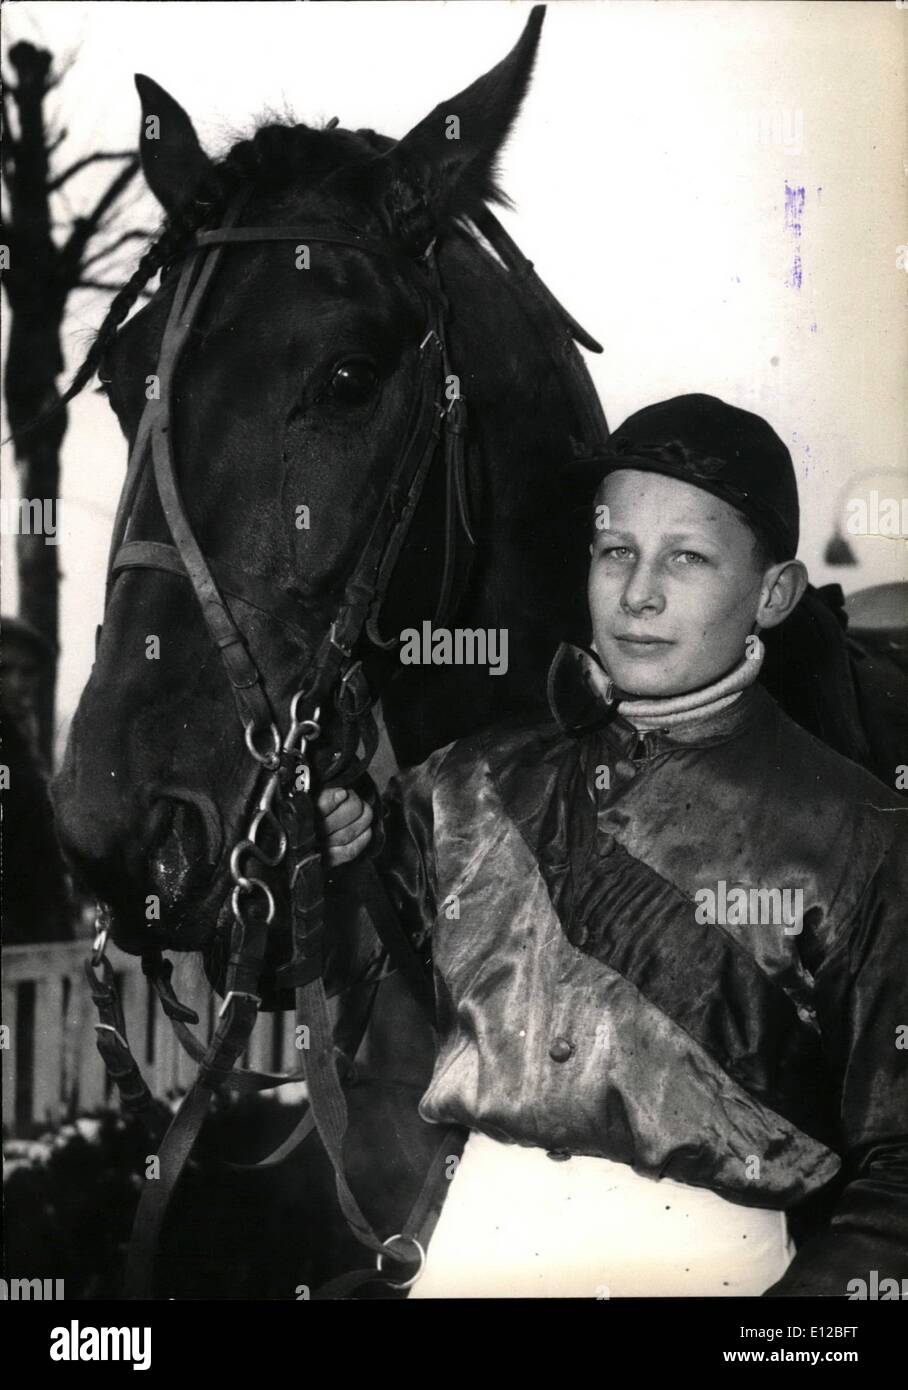 Dec. 09, 2011 - Fourteen year old jockey totals 20 victories. At 14, Jean-Pierre Dubois is France's youngest jockey. He already totals twenty victories. He scored his first victory when he was only 12 years old. He is seen here at the Vincennes racecourse. Feb. 18/55 Stock Photo